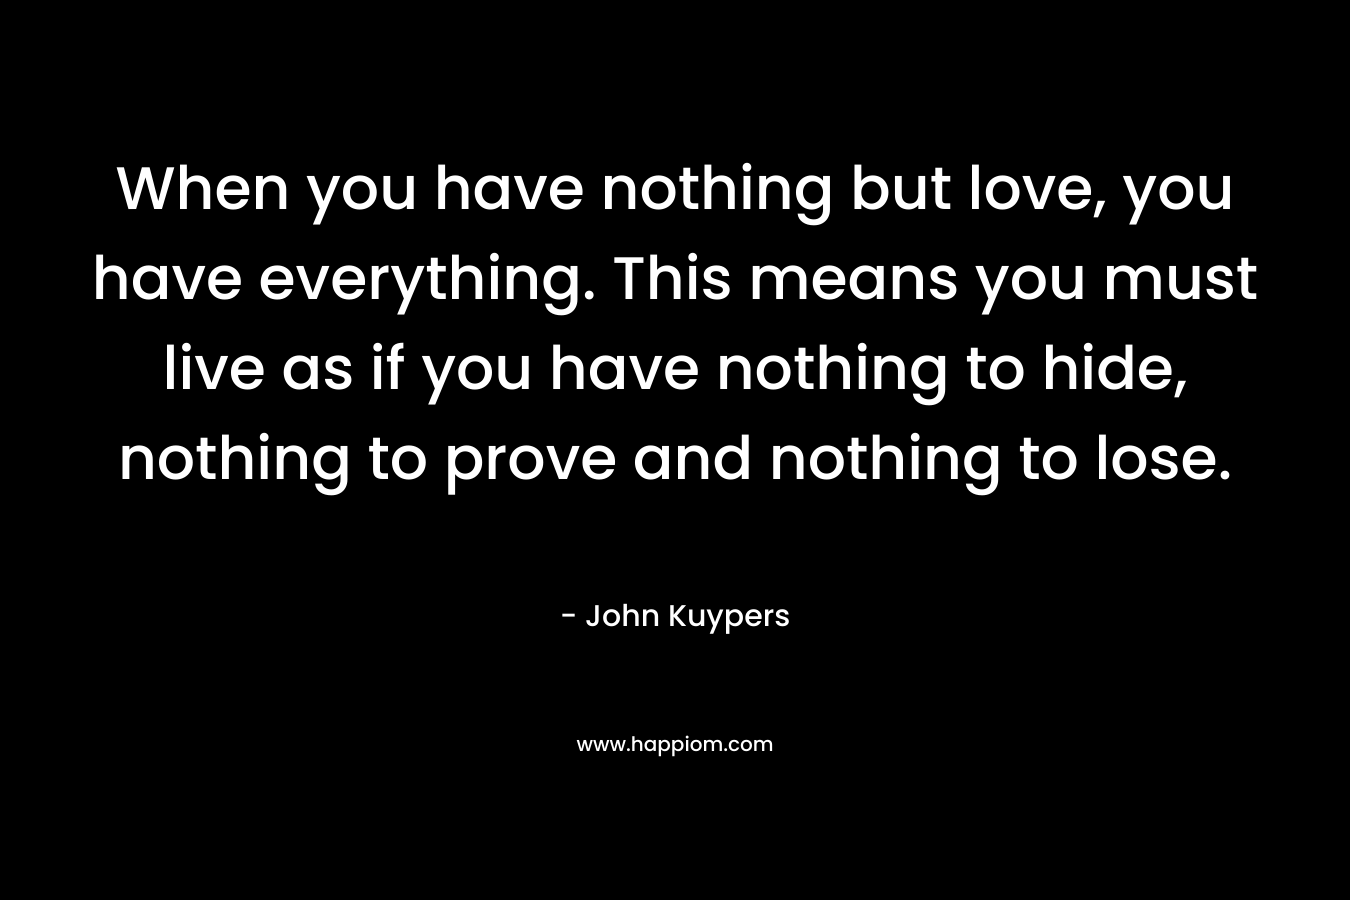 When you have nothing but love, you have everything. This means you must live as if you have nothing to hide, nothing to prove and nothing to lose. – John Kuypers